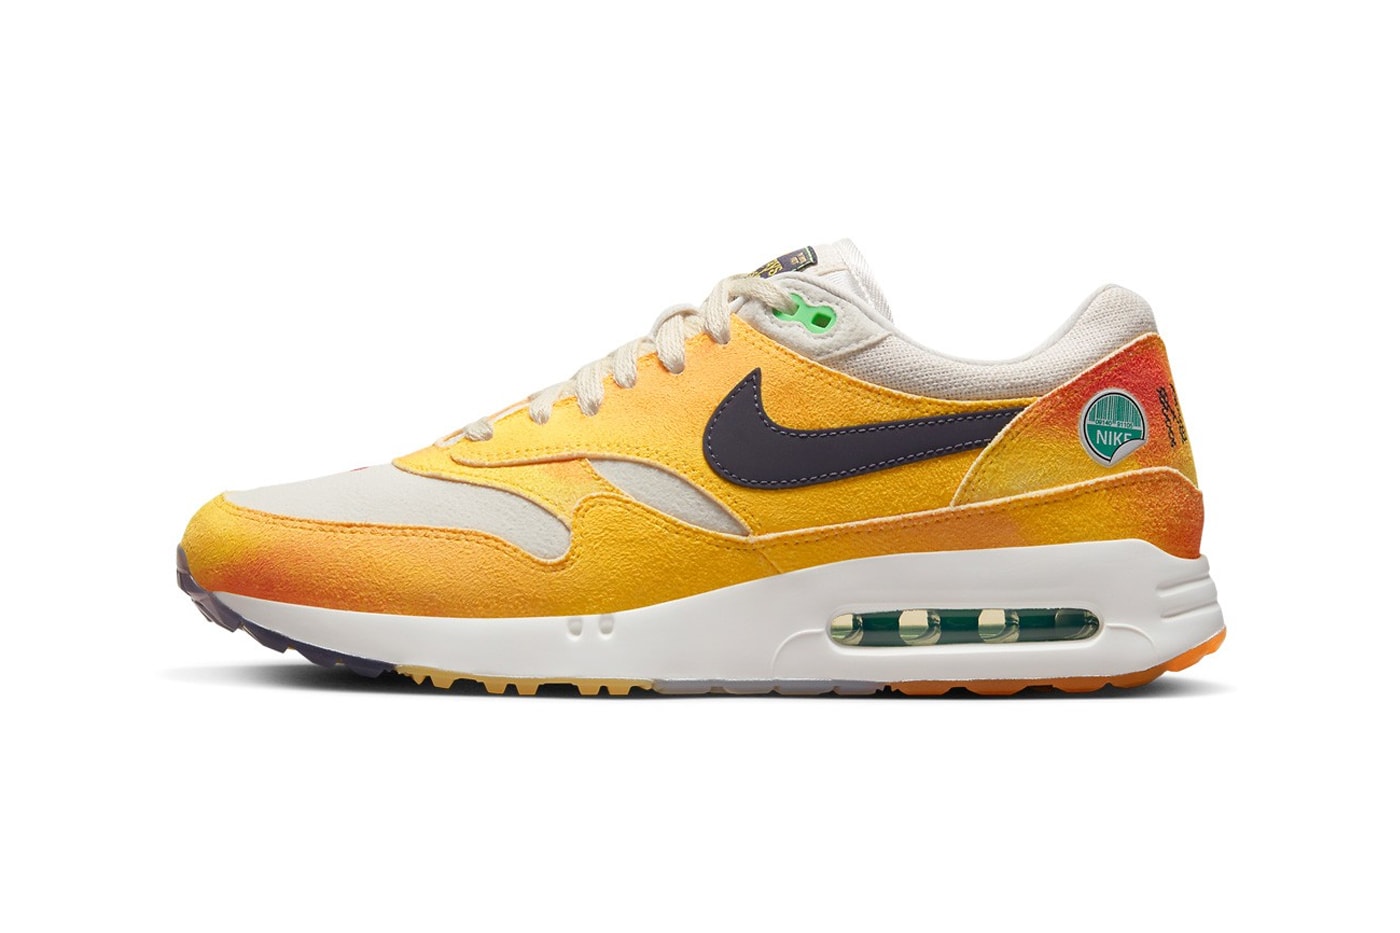 nike air max 1 golf masters tournament always fresh dv6802 007 release date information